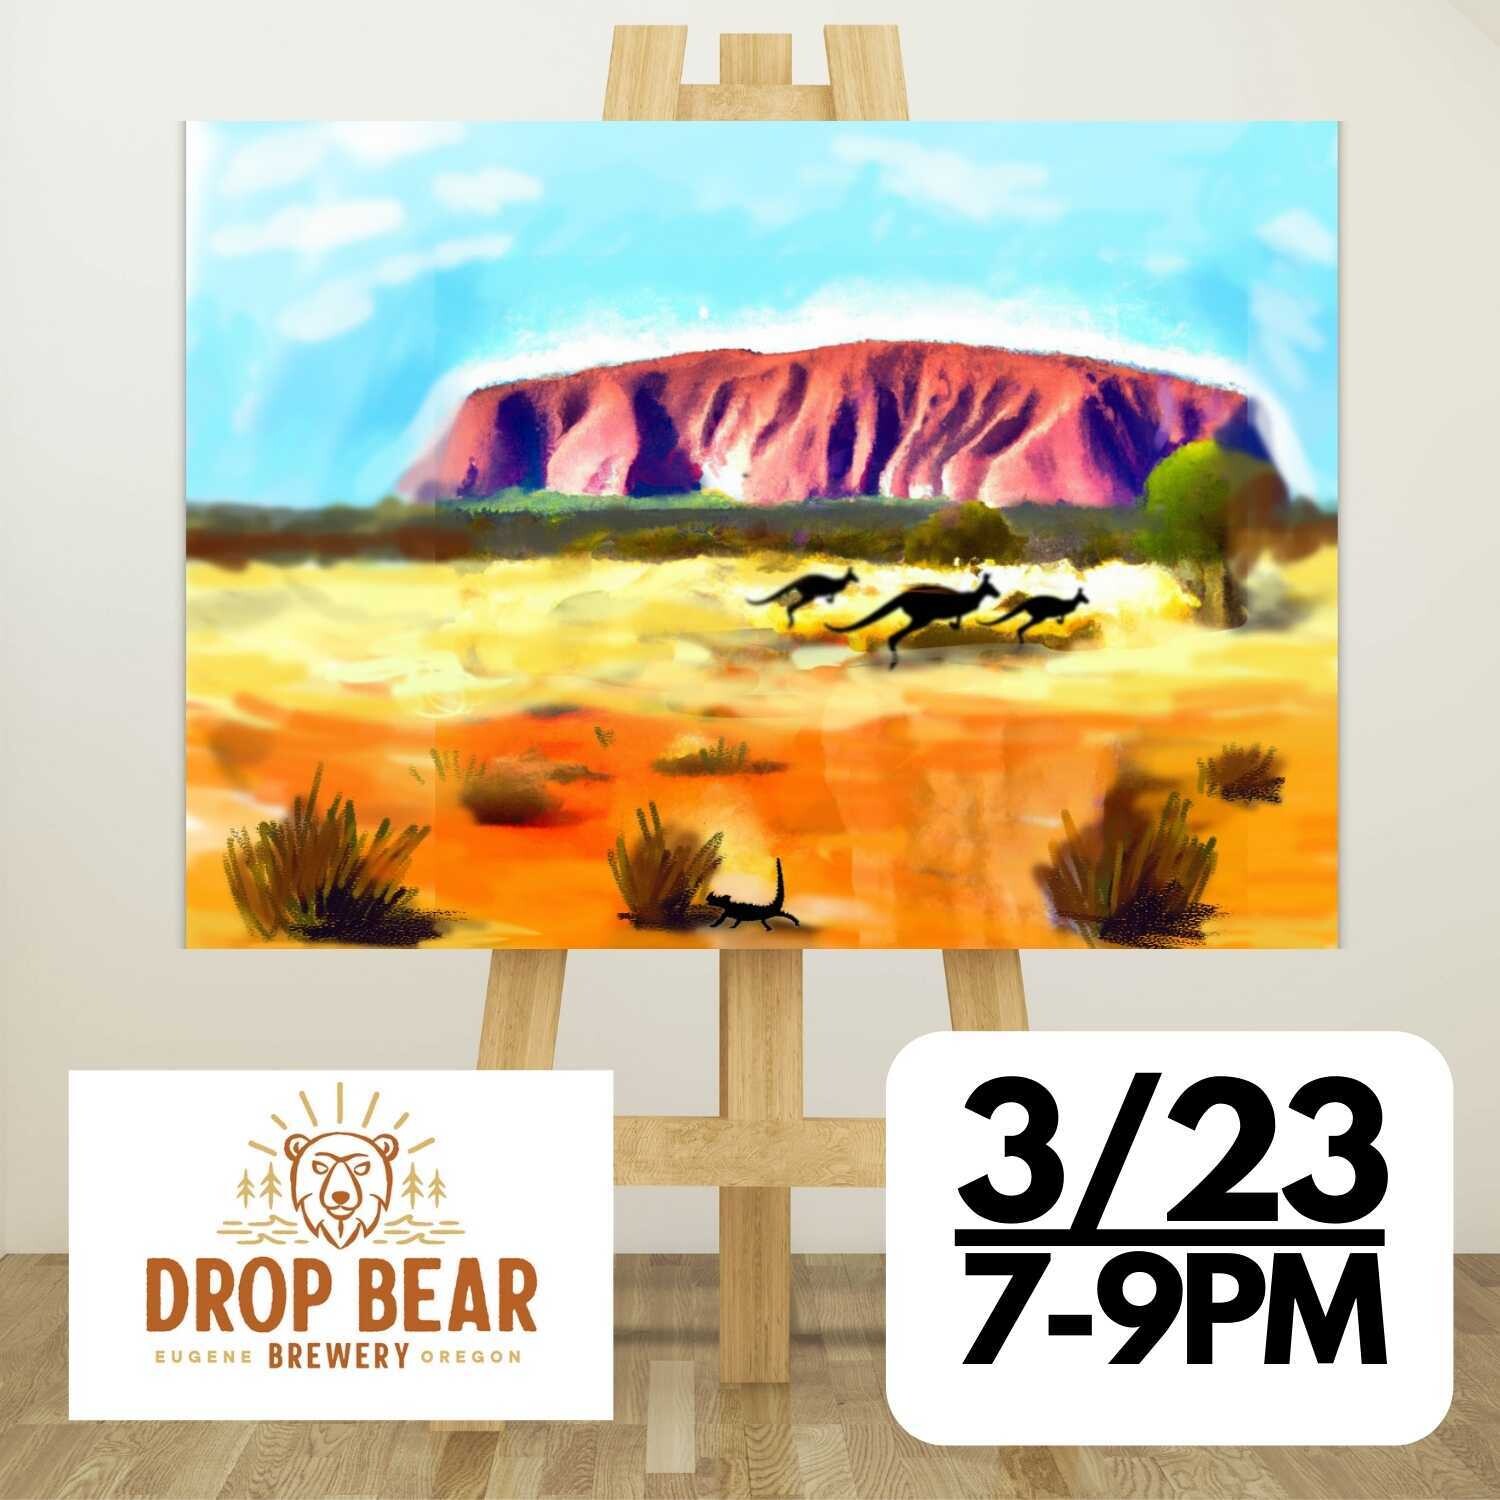 Paint and Brews at Drop Bear Brewery-Thurs Mar 23 @ 7-9pm